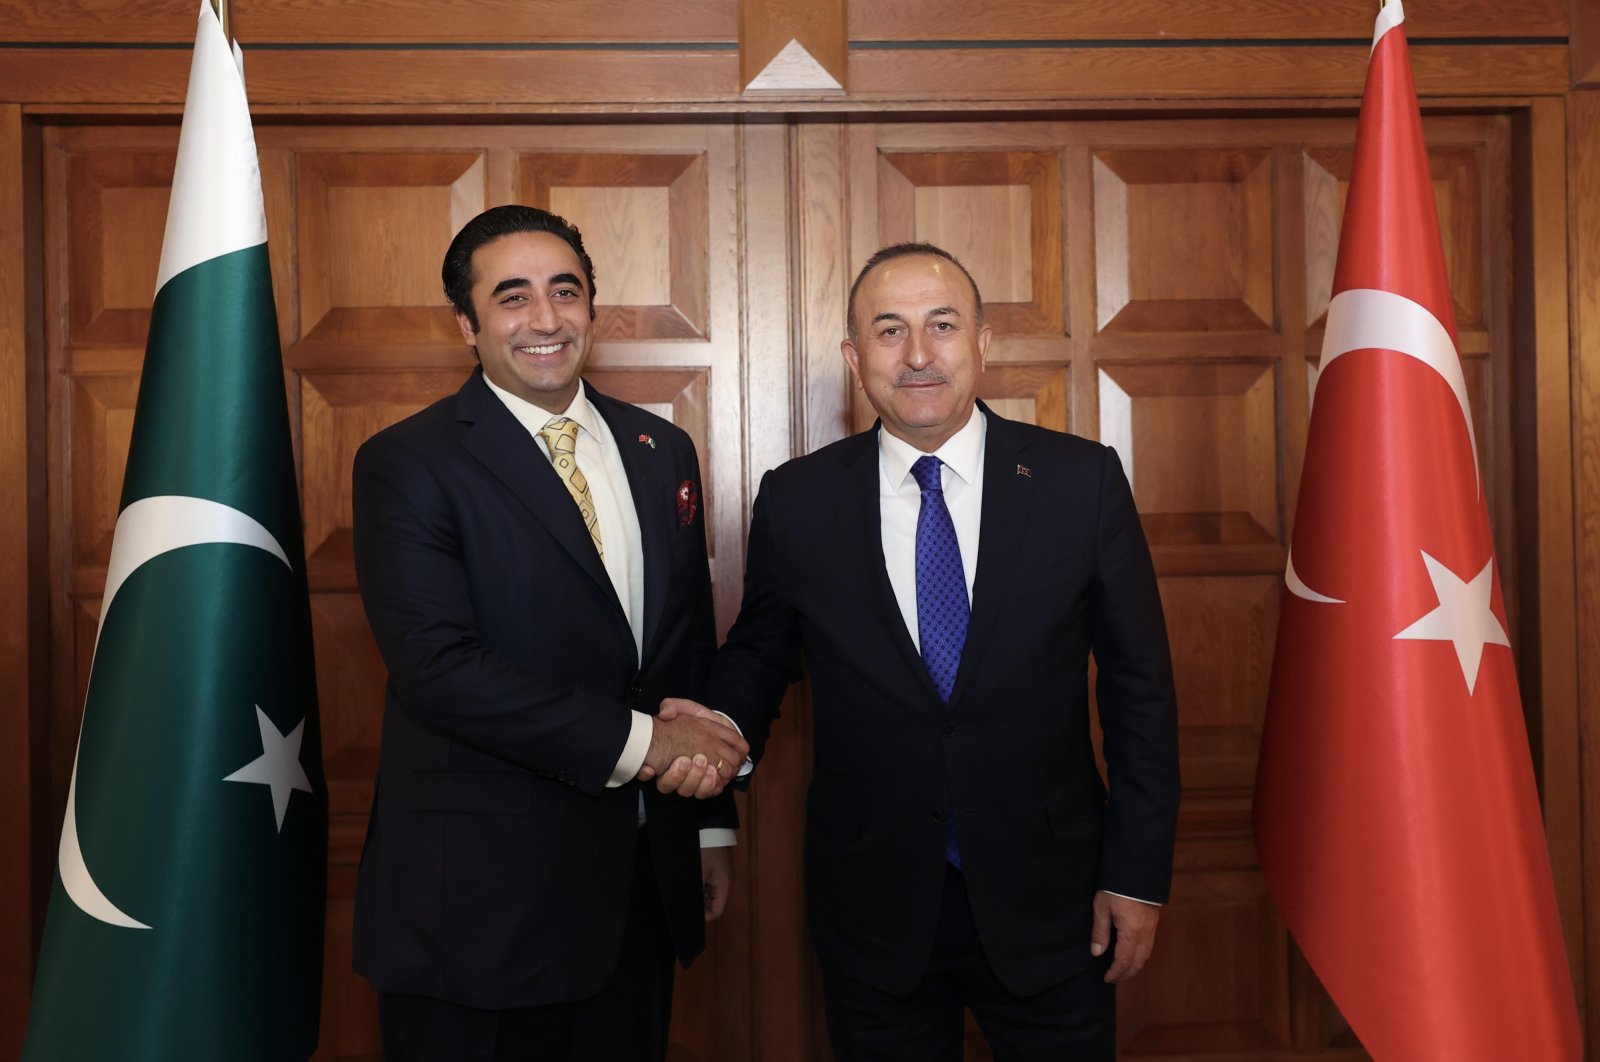 Foreign Minister Mevlüt Çavuşoğlu shakes hands with his Pakistani counterpart Bilaval Butto Zerdari at the Foreign Ministry headquarters in Ankara, June 1, 2022. (AA Photo)